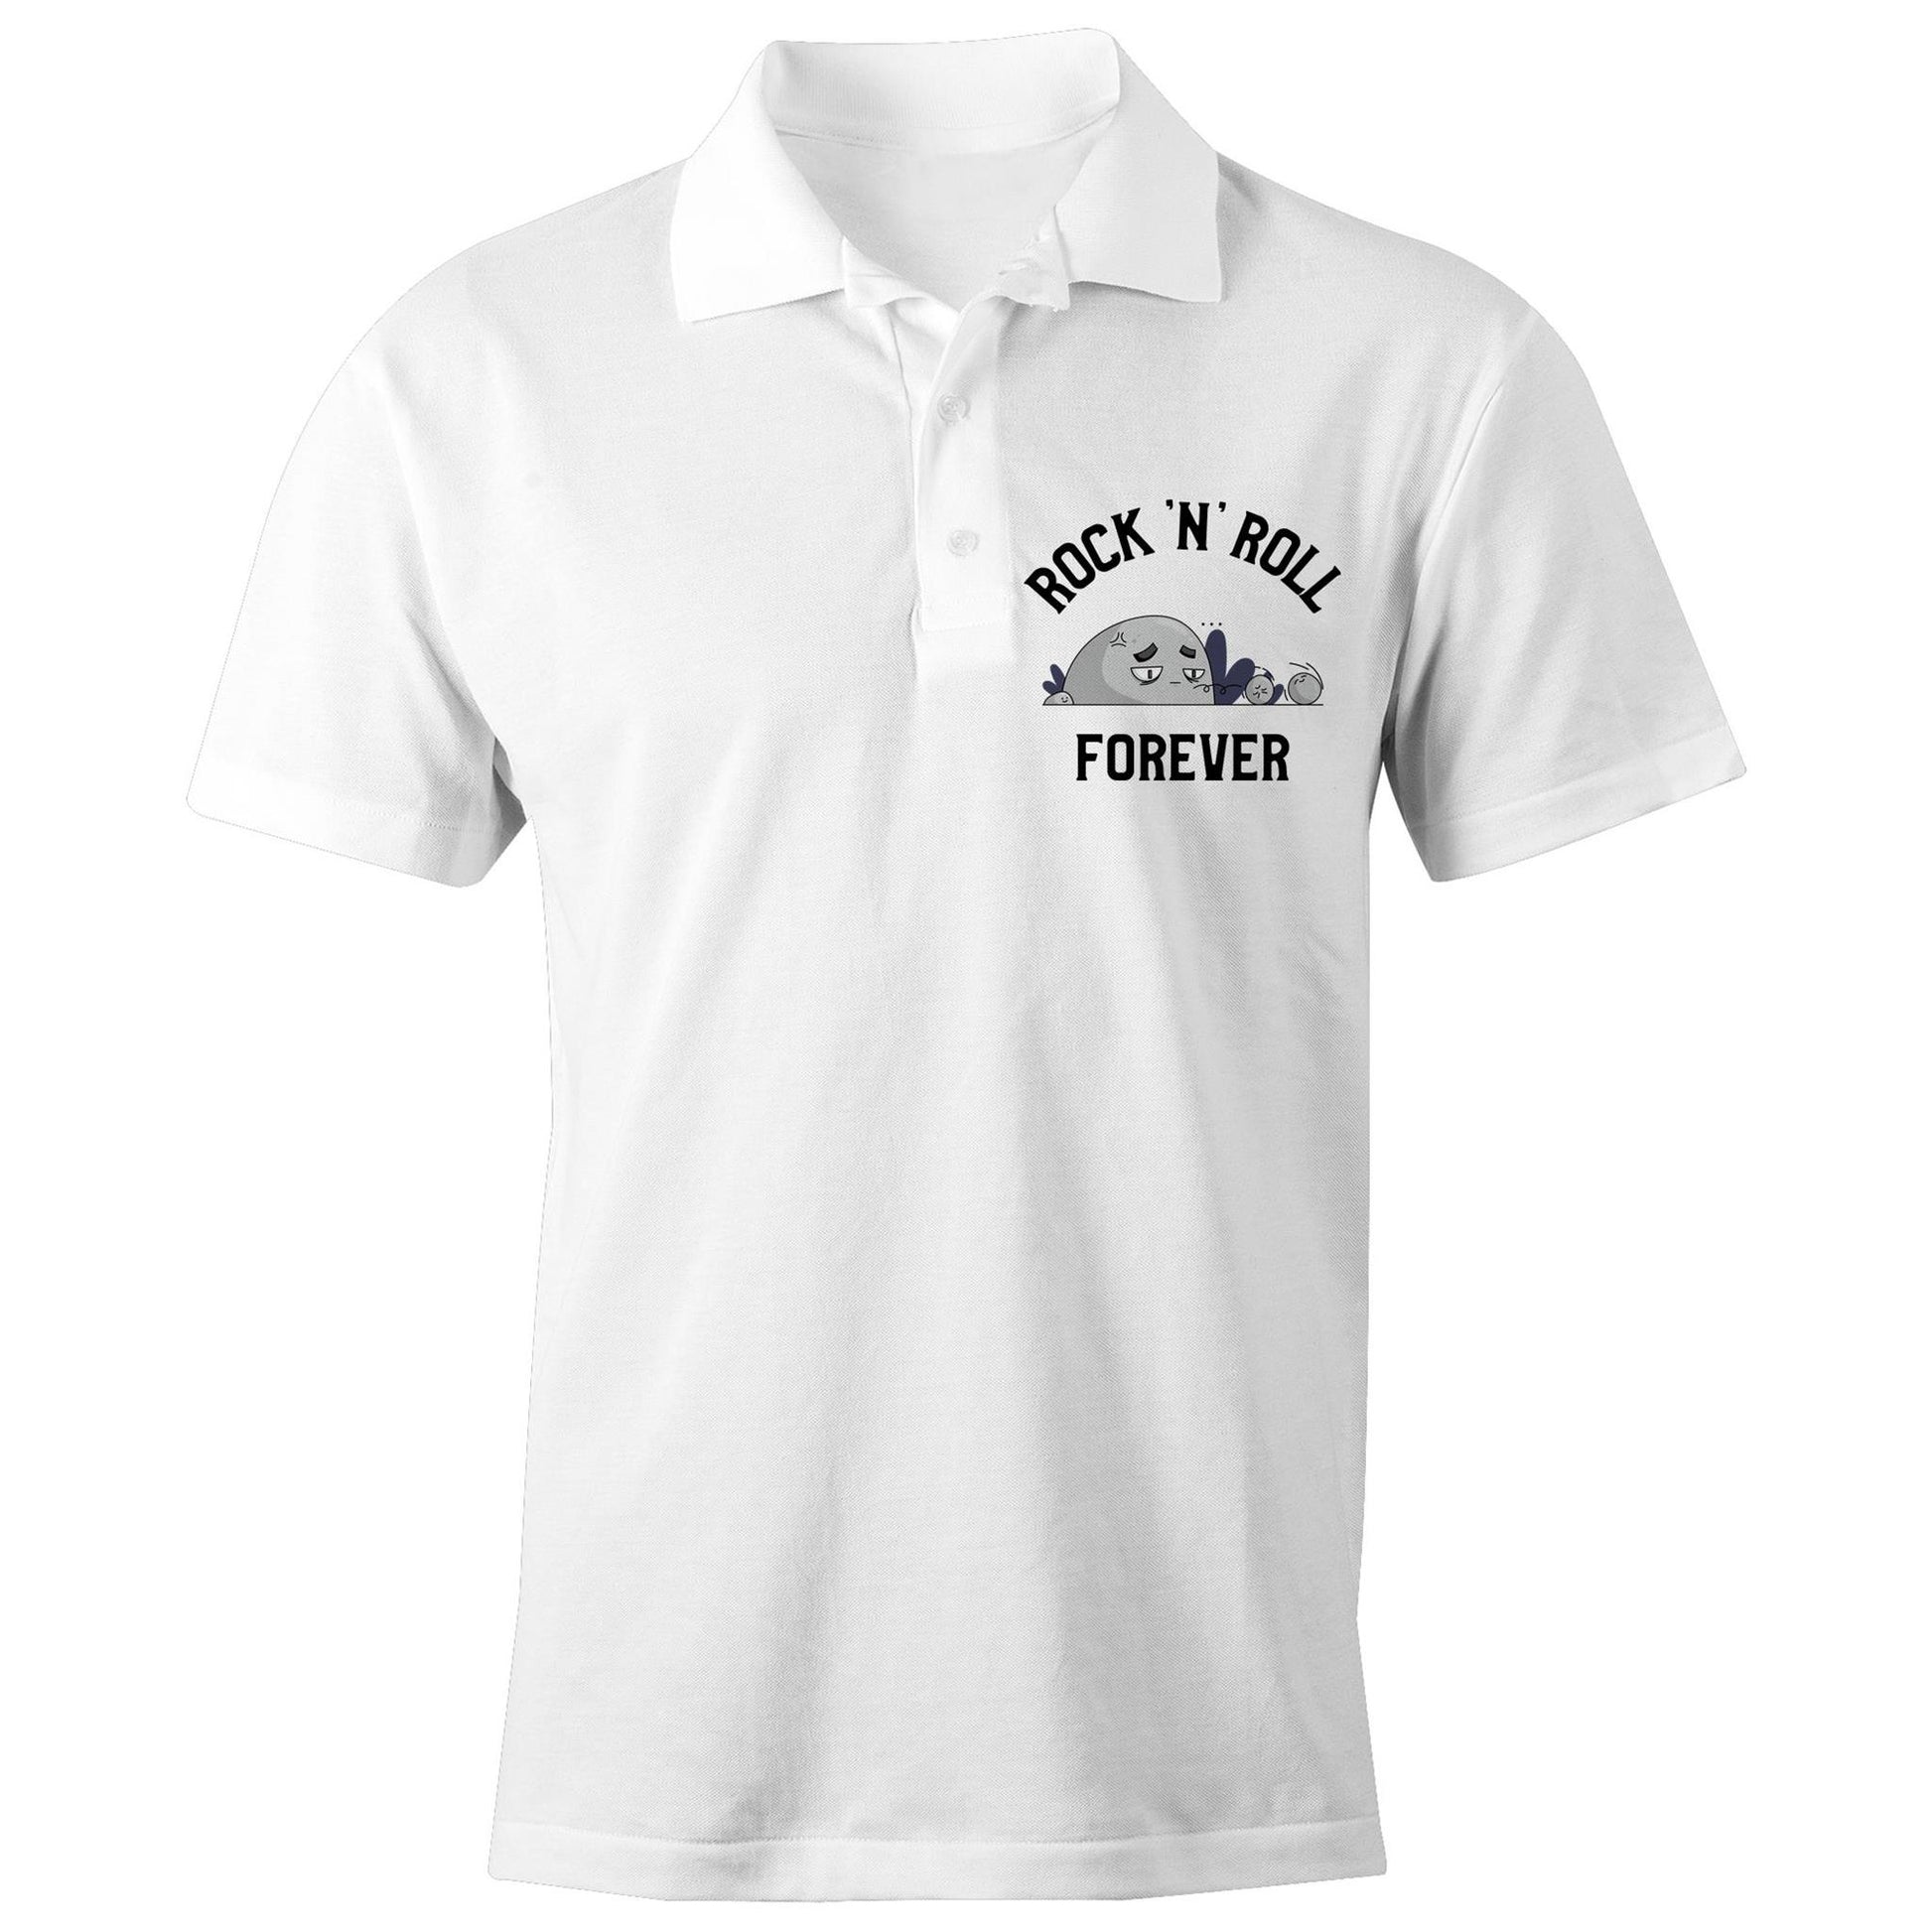 Rock 'N' Roll Forever - Chad S/S Polo Shirt, Printed White Polo Shirt Music